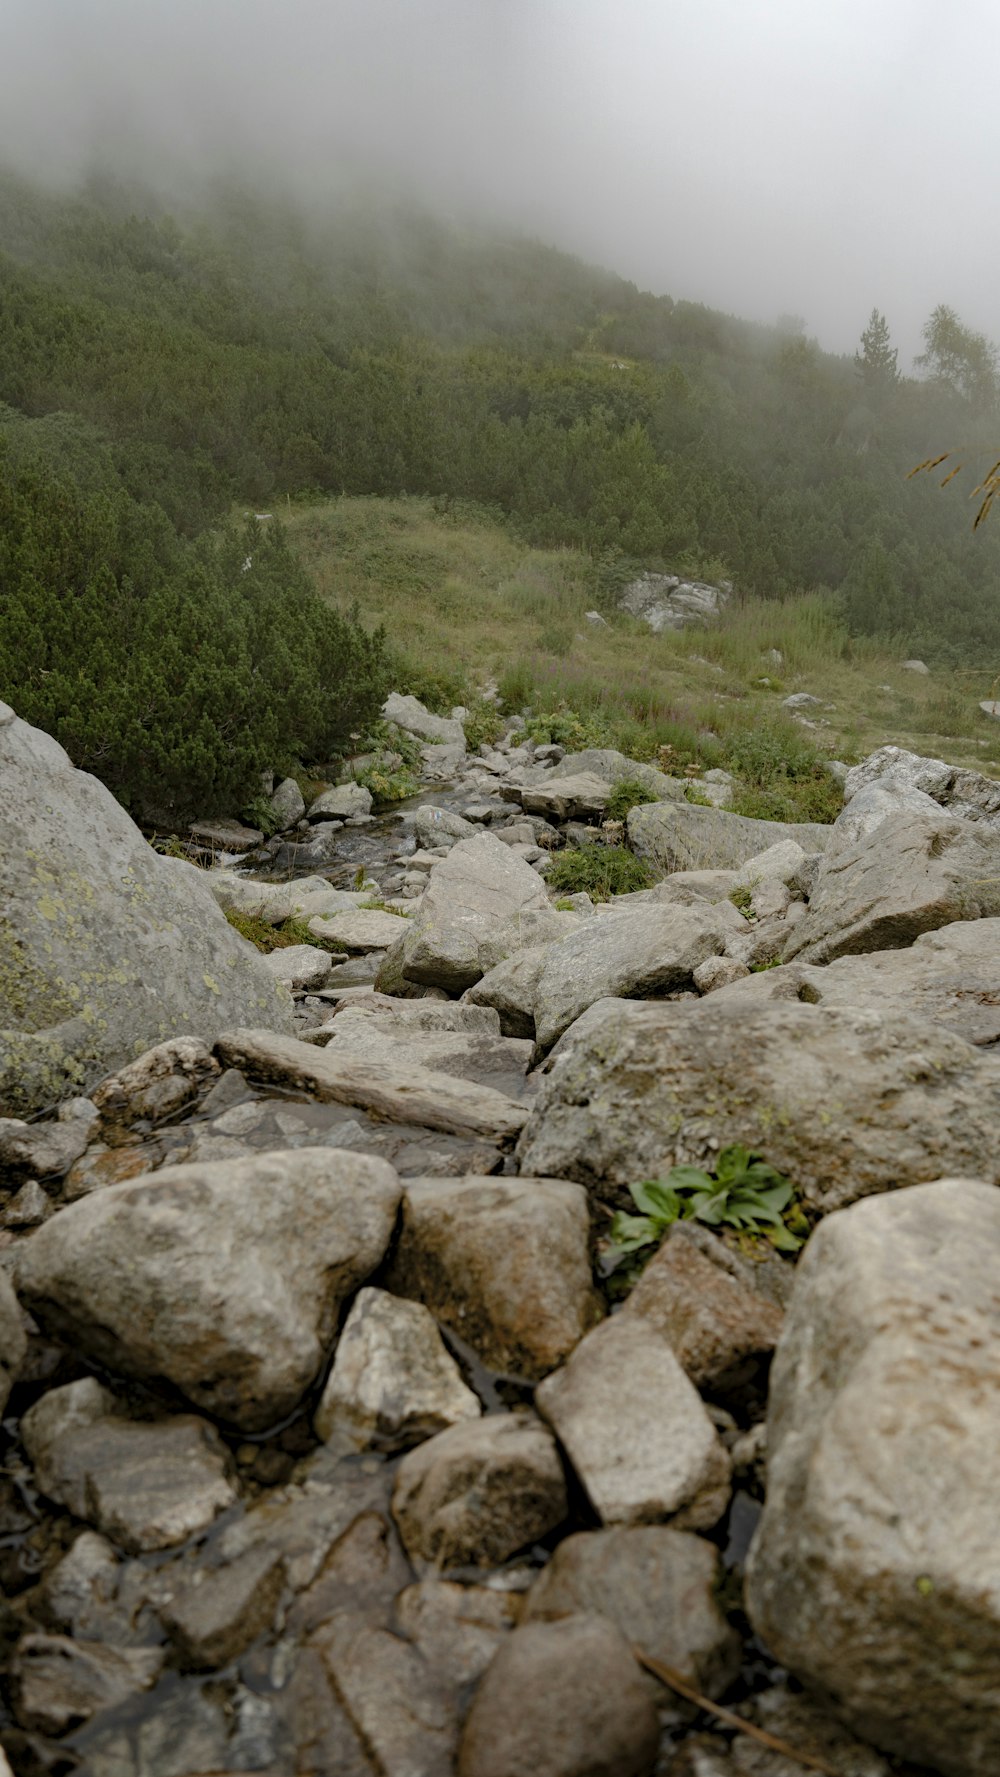 a rocky area with grass and trees